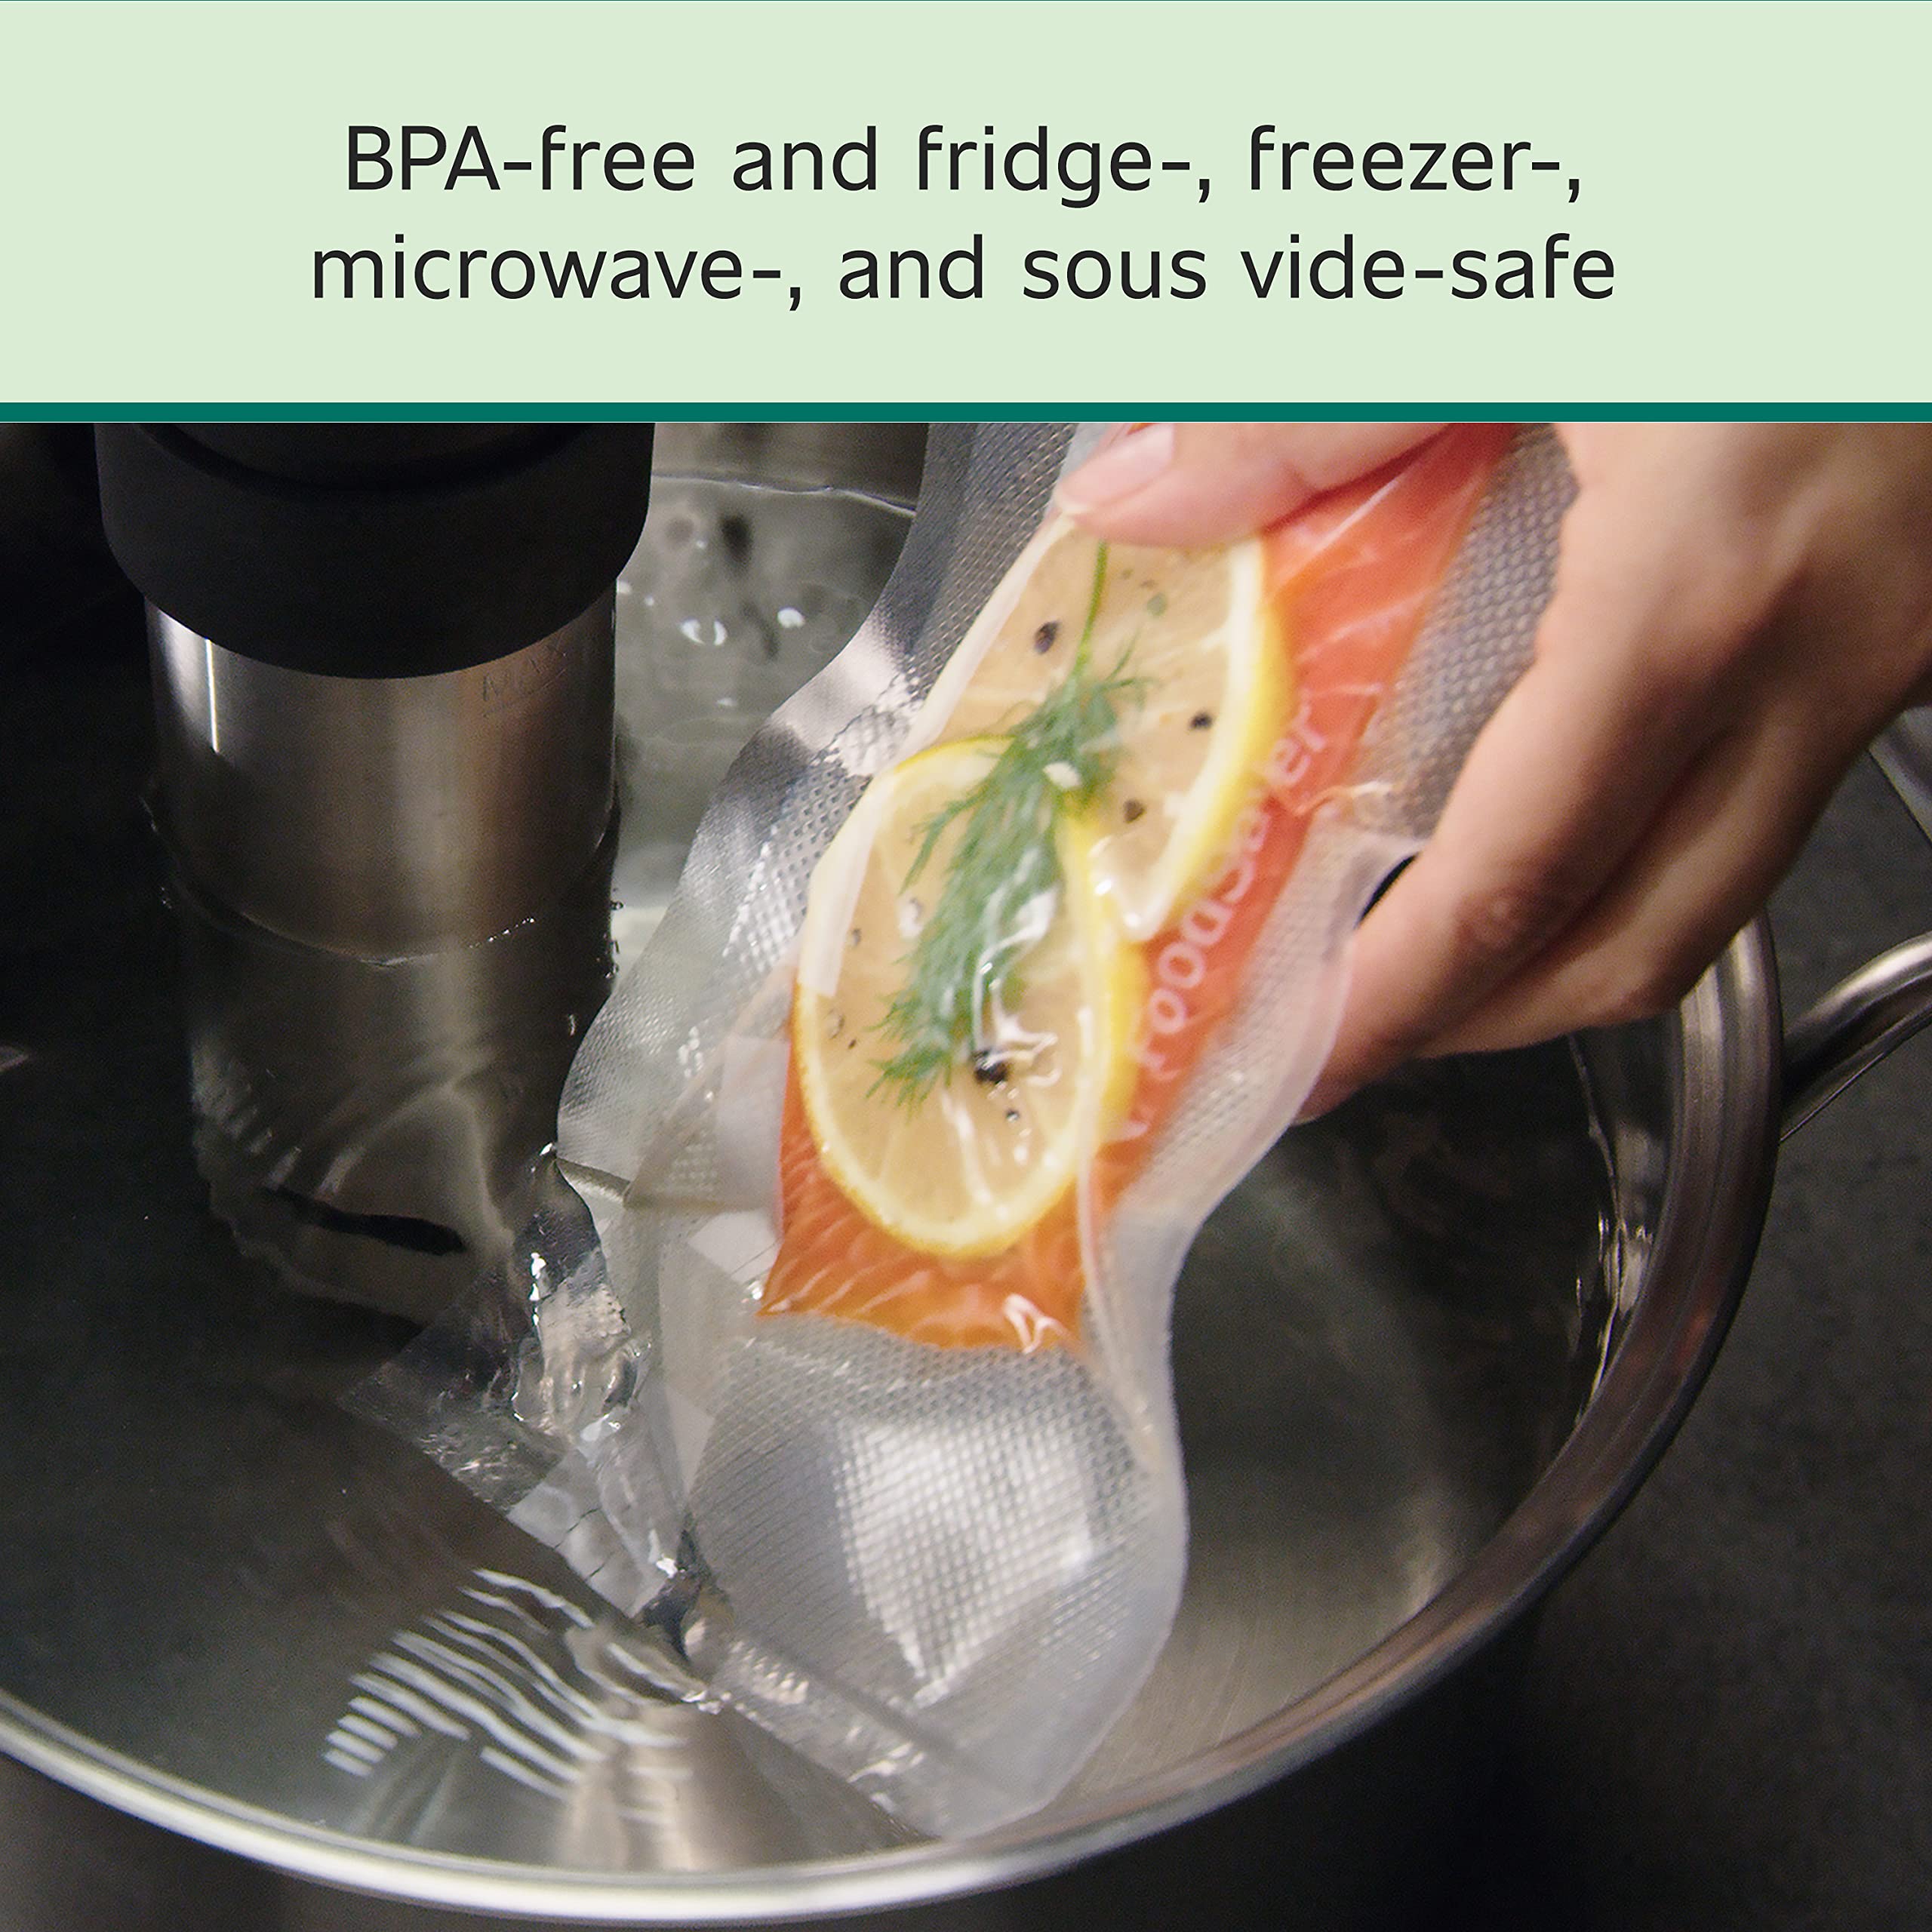 FoodSaver 1-Pint Precut Vacuum Seal Bags with BPA-Free Multilayer Construction for Food Preservation, 28 Count, Clear